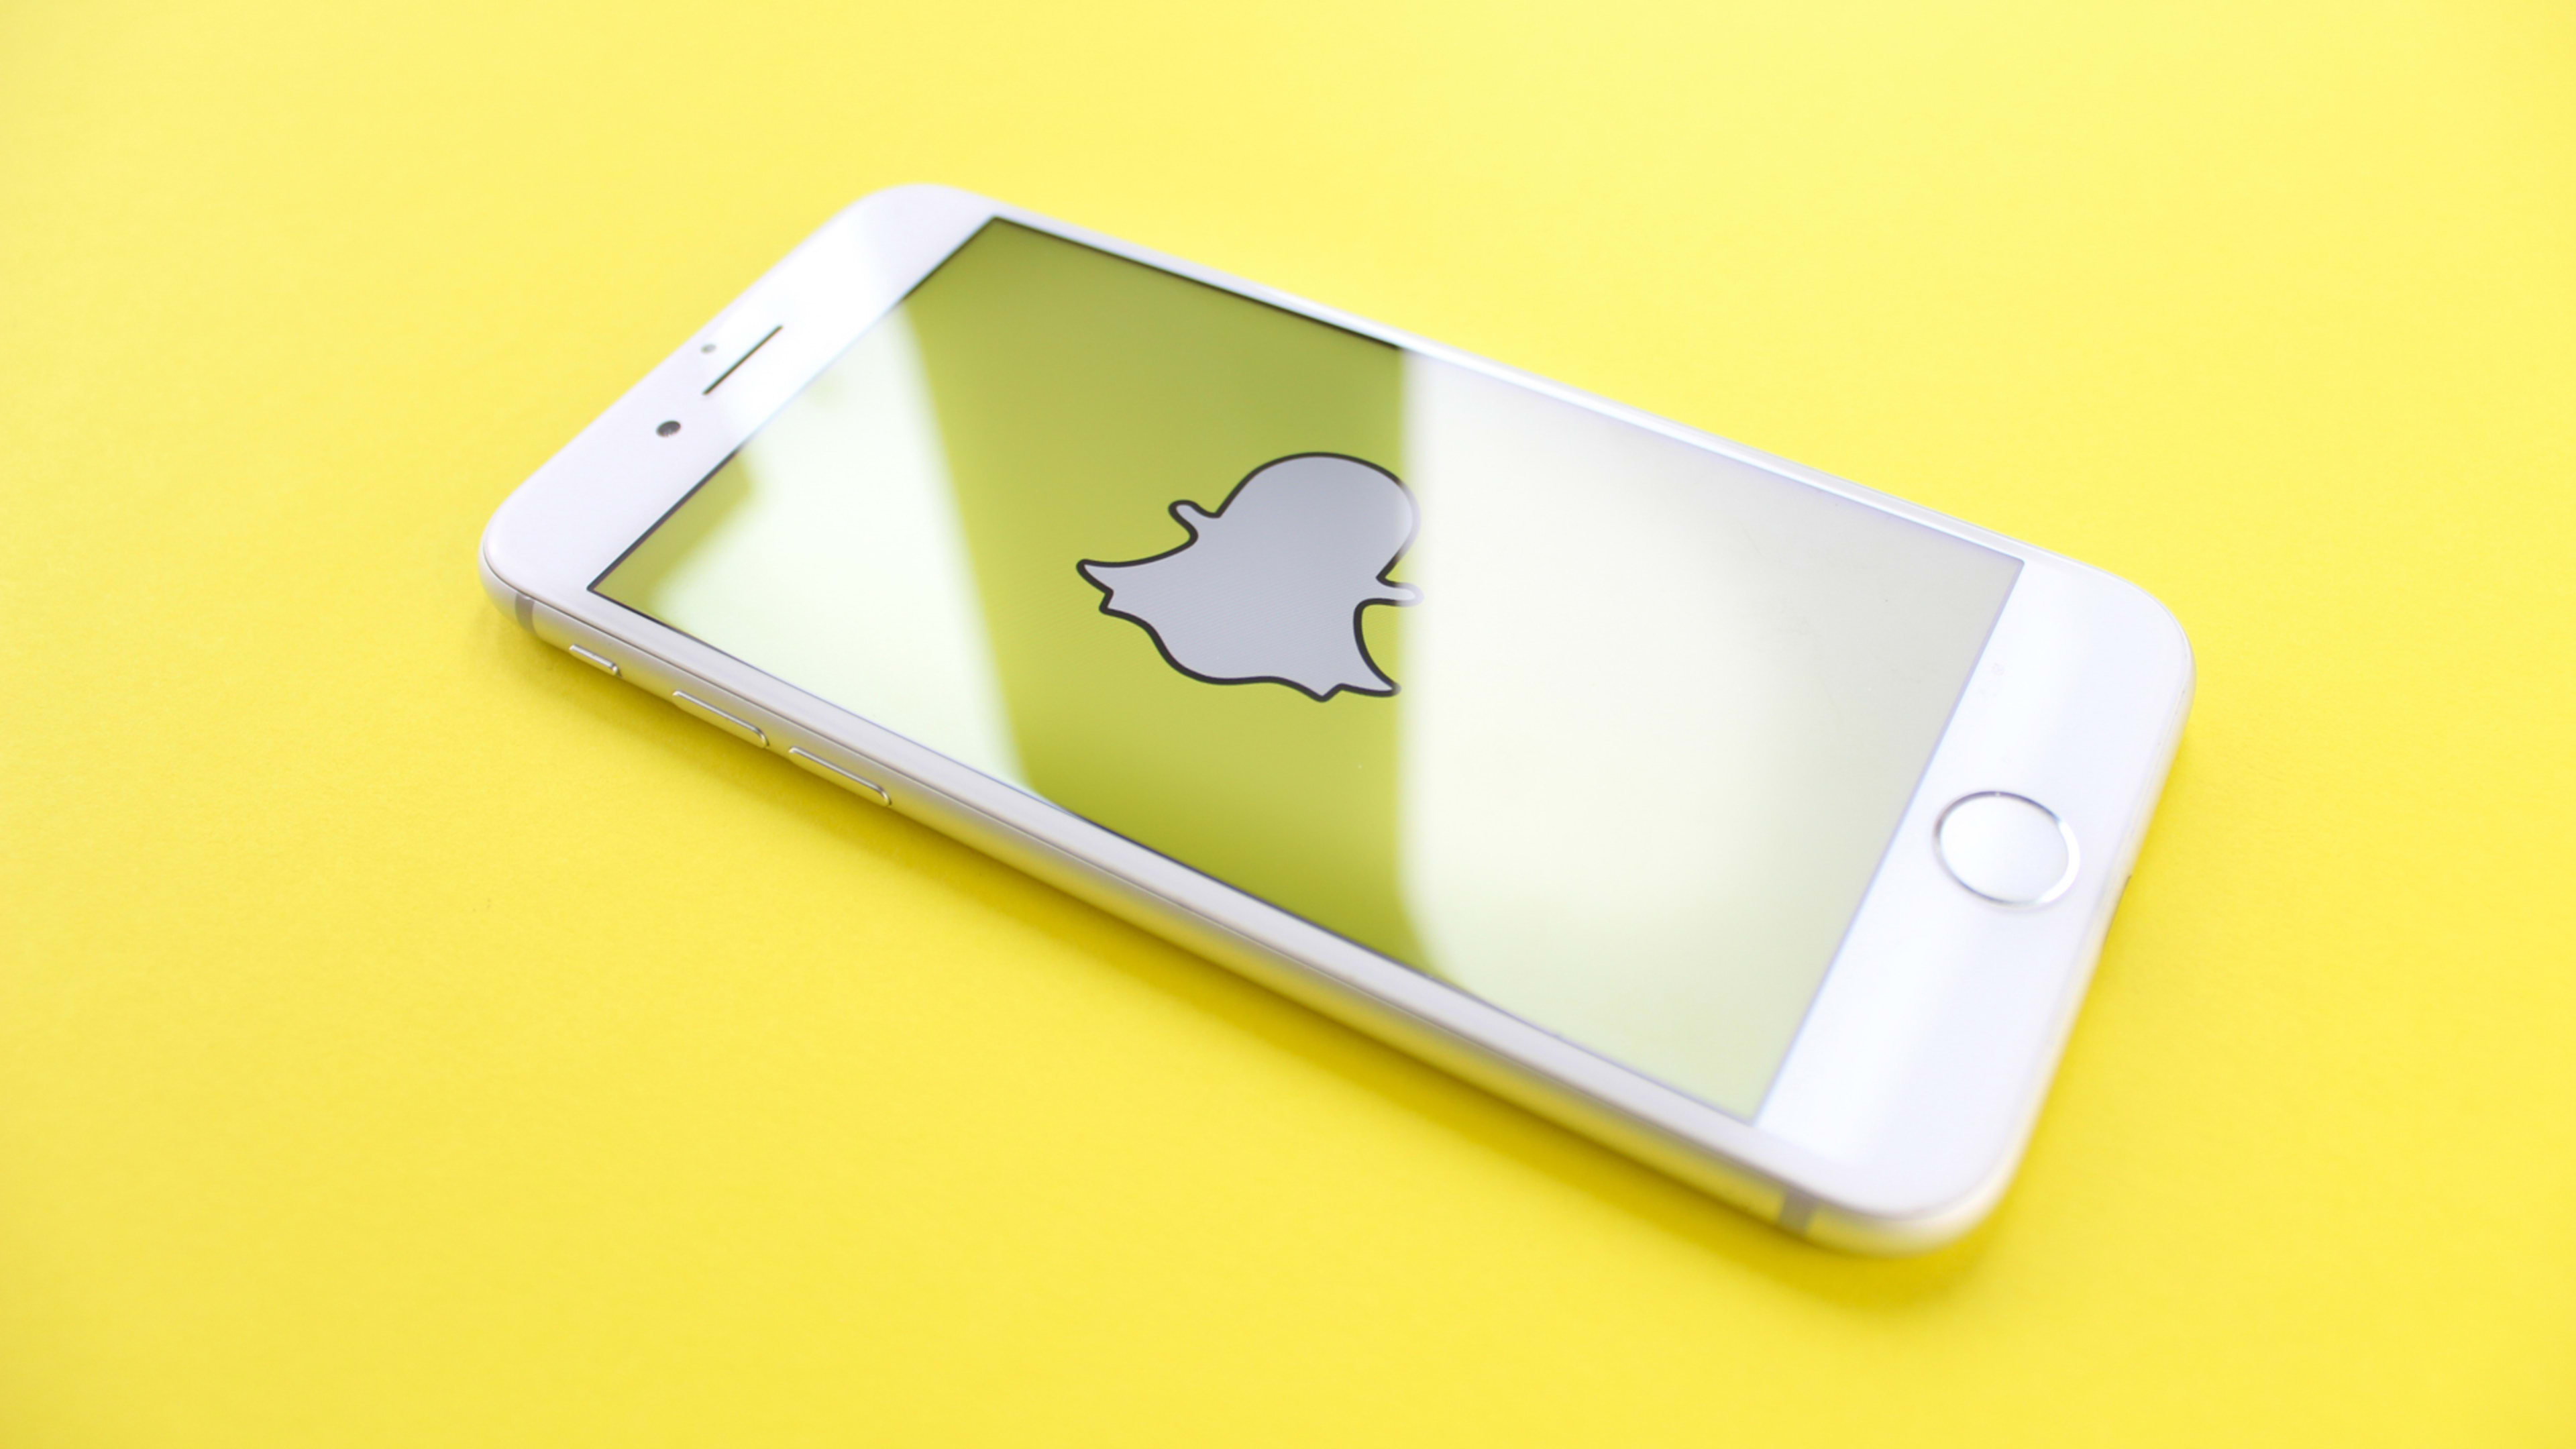 Snap’s user growth still seems to be sputtering